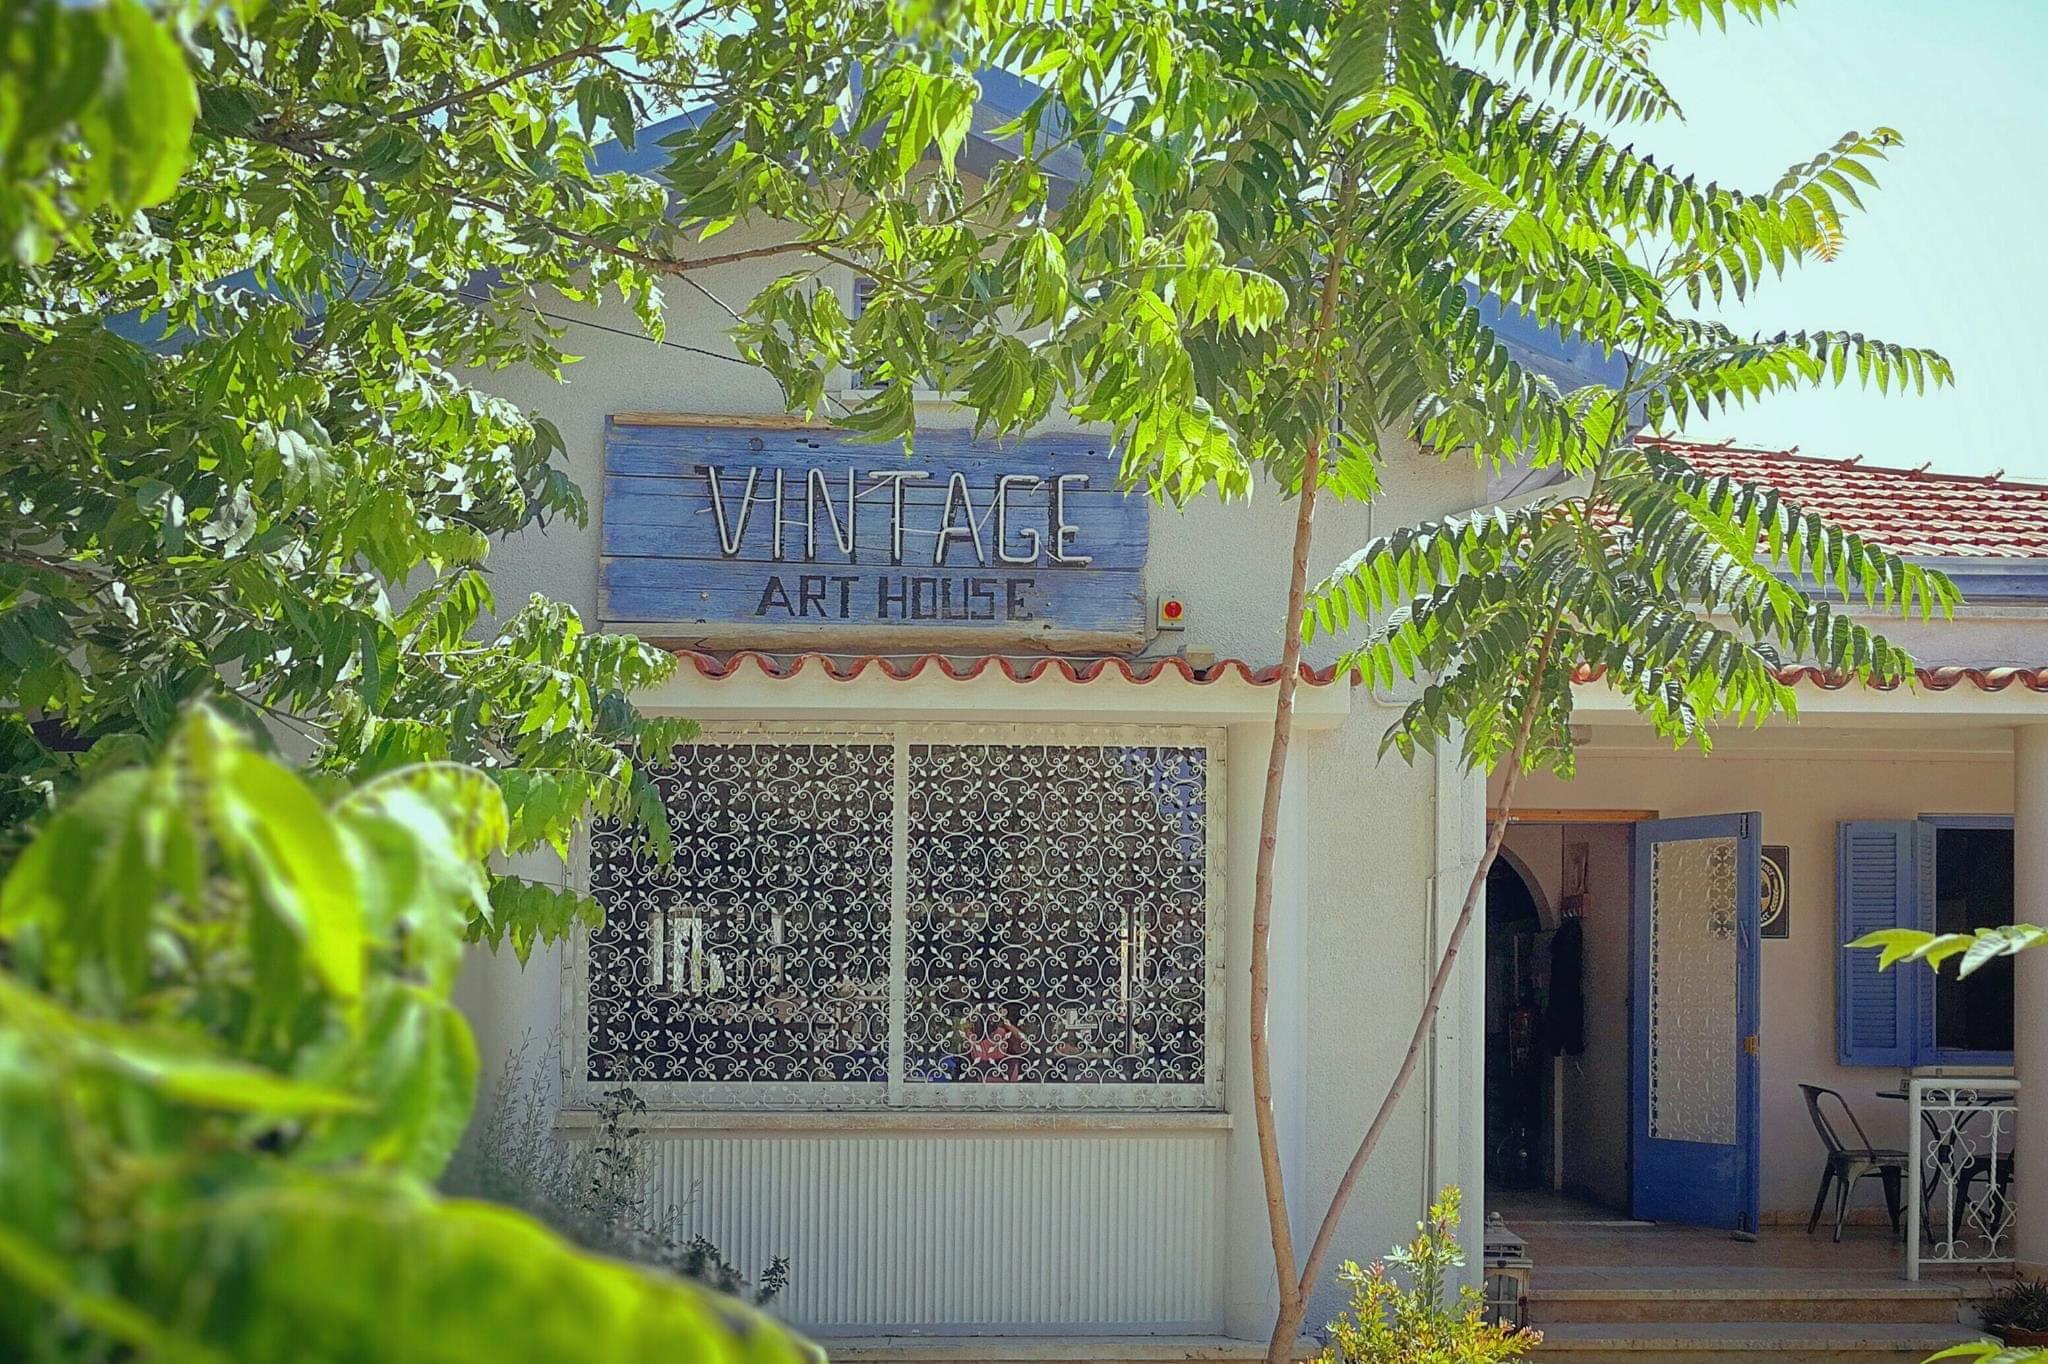 Cover image of this place Vintage Art Cafe